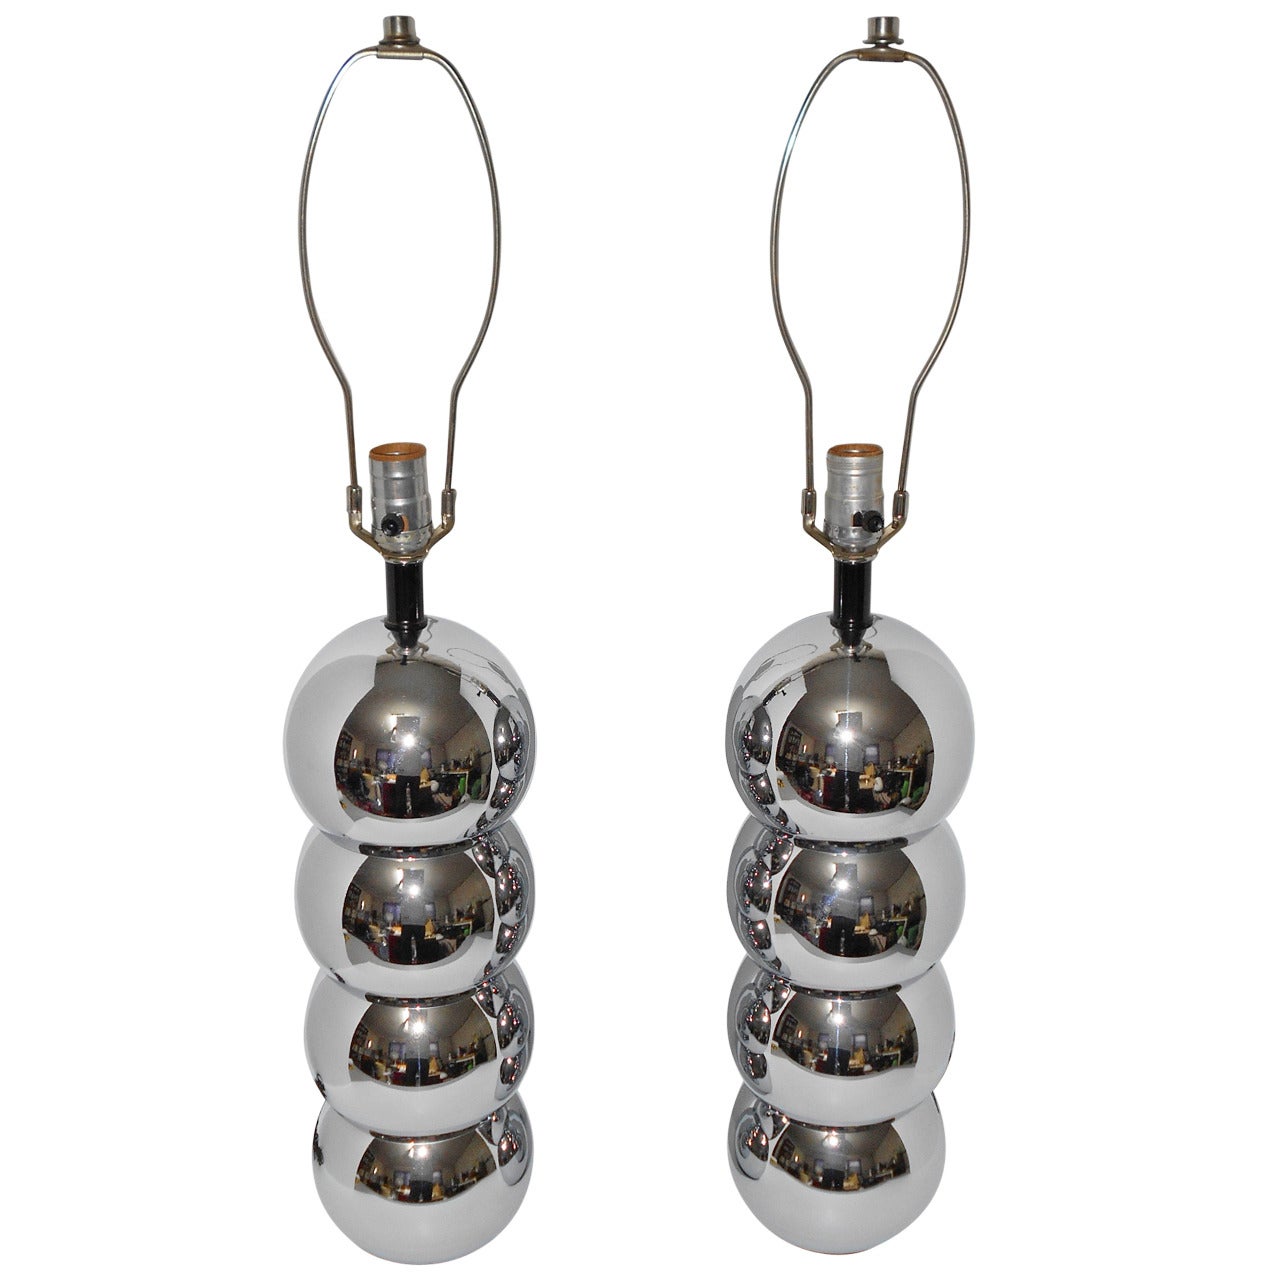 Pair of George Kovacs Chrome Ball Table Lamps